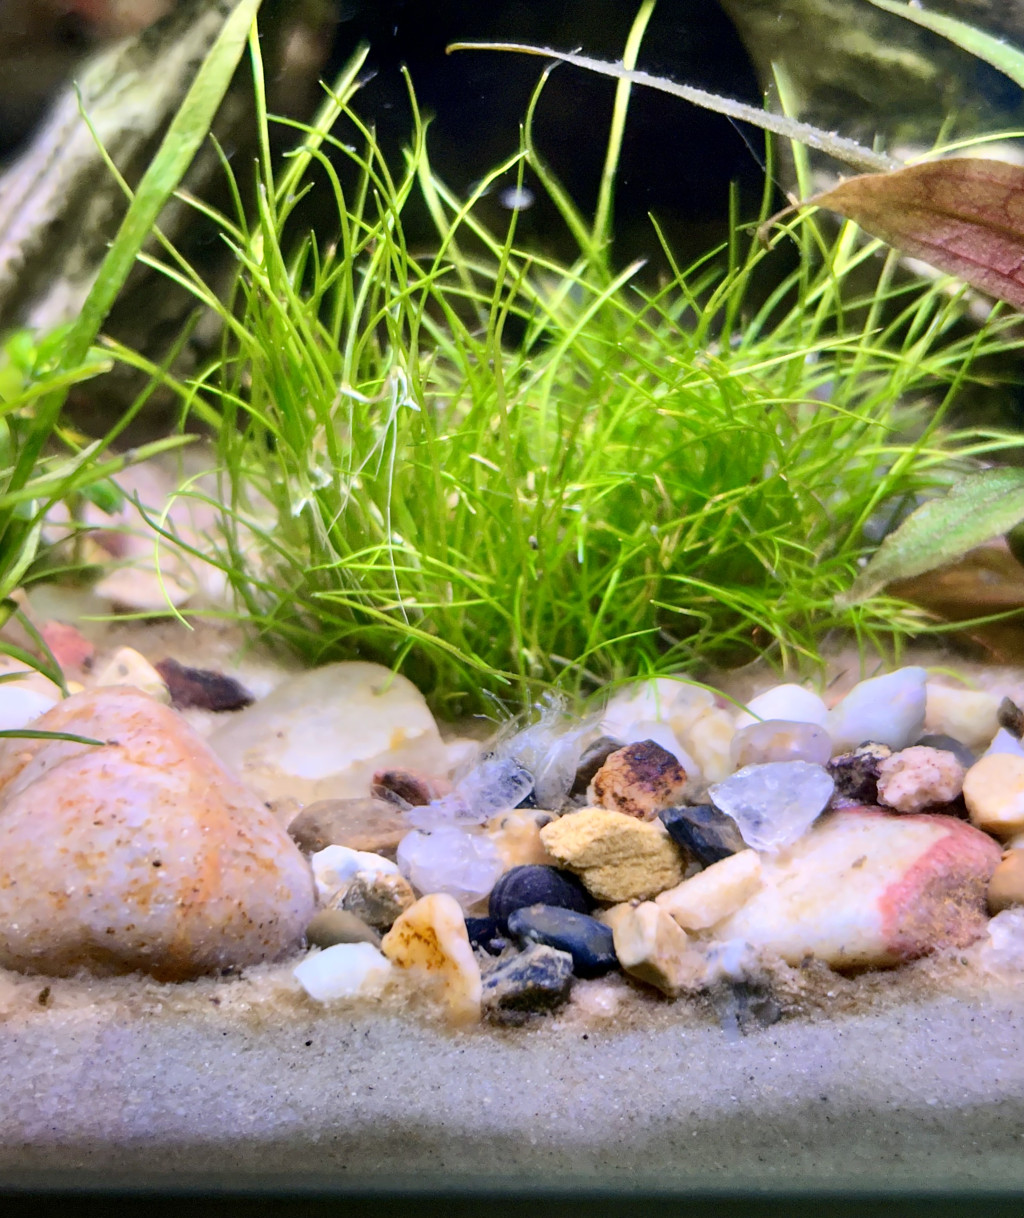 A clear, shrimp-shaped exoskeleton lays on the gravel in front of a clump of grass in a closeup view of an aquarium